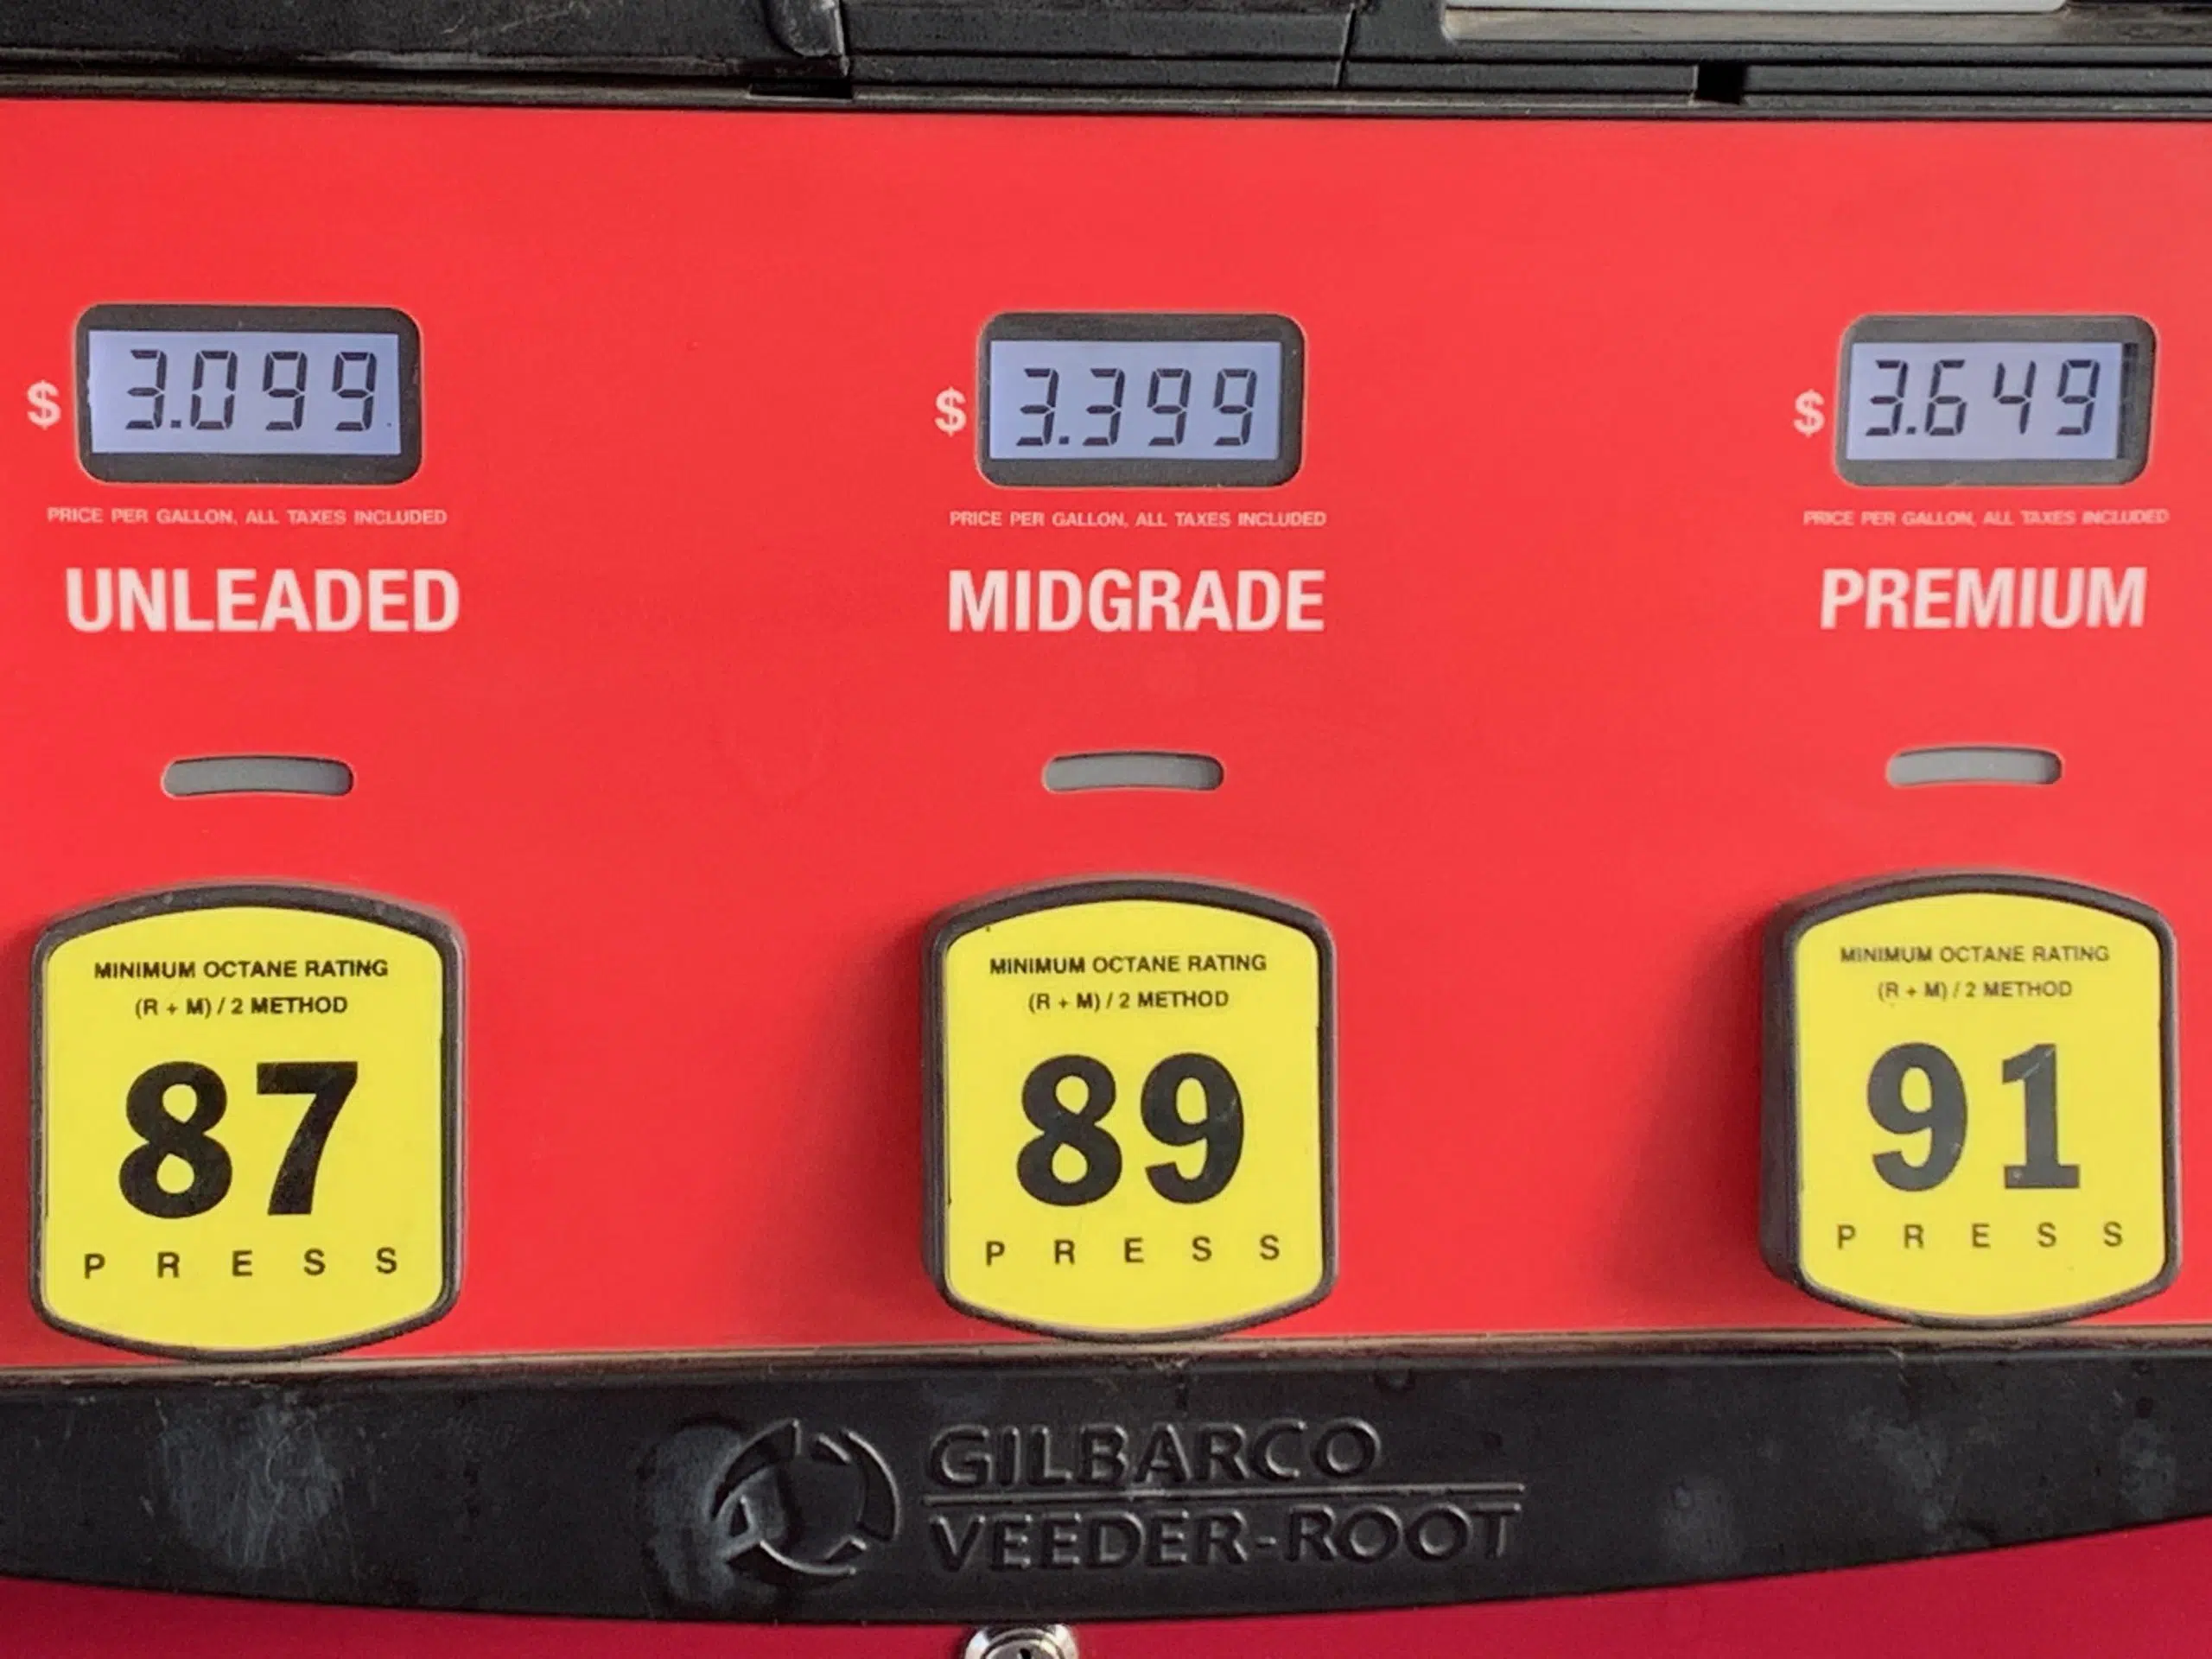 Gas prices now approaching $3.10 a gallon locally